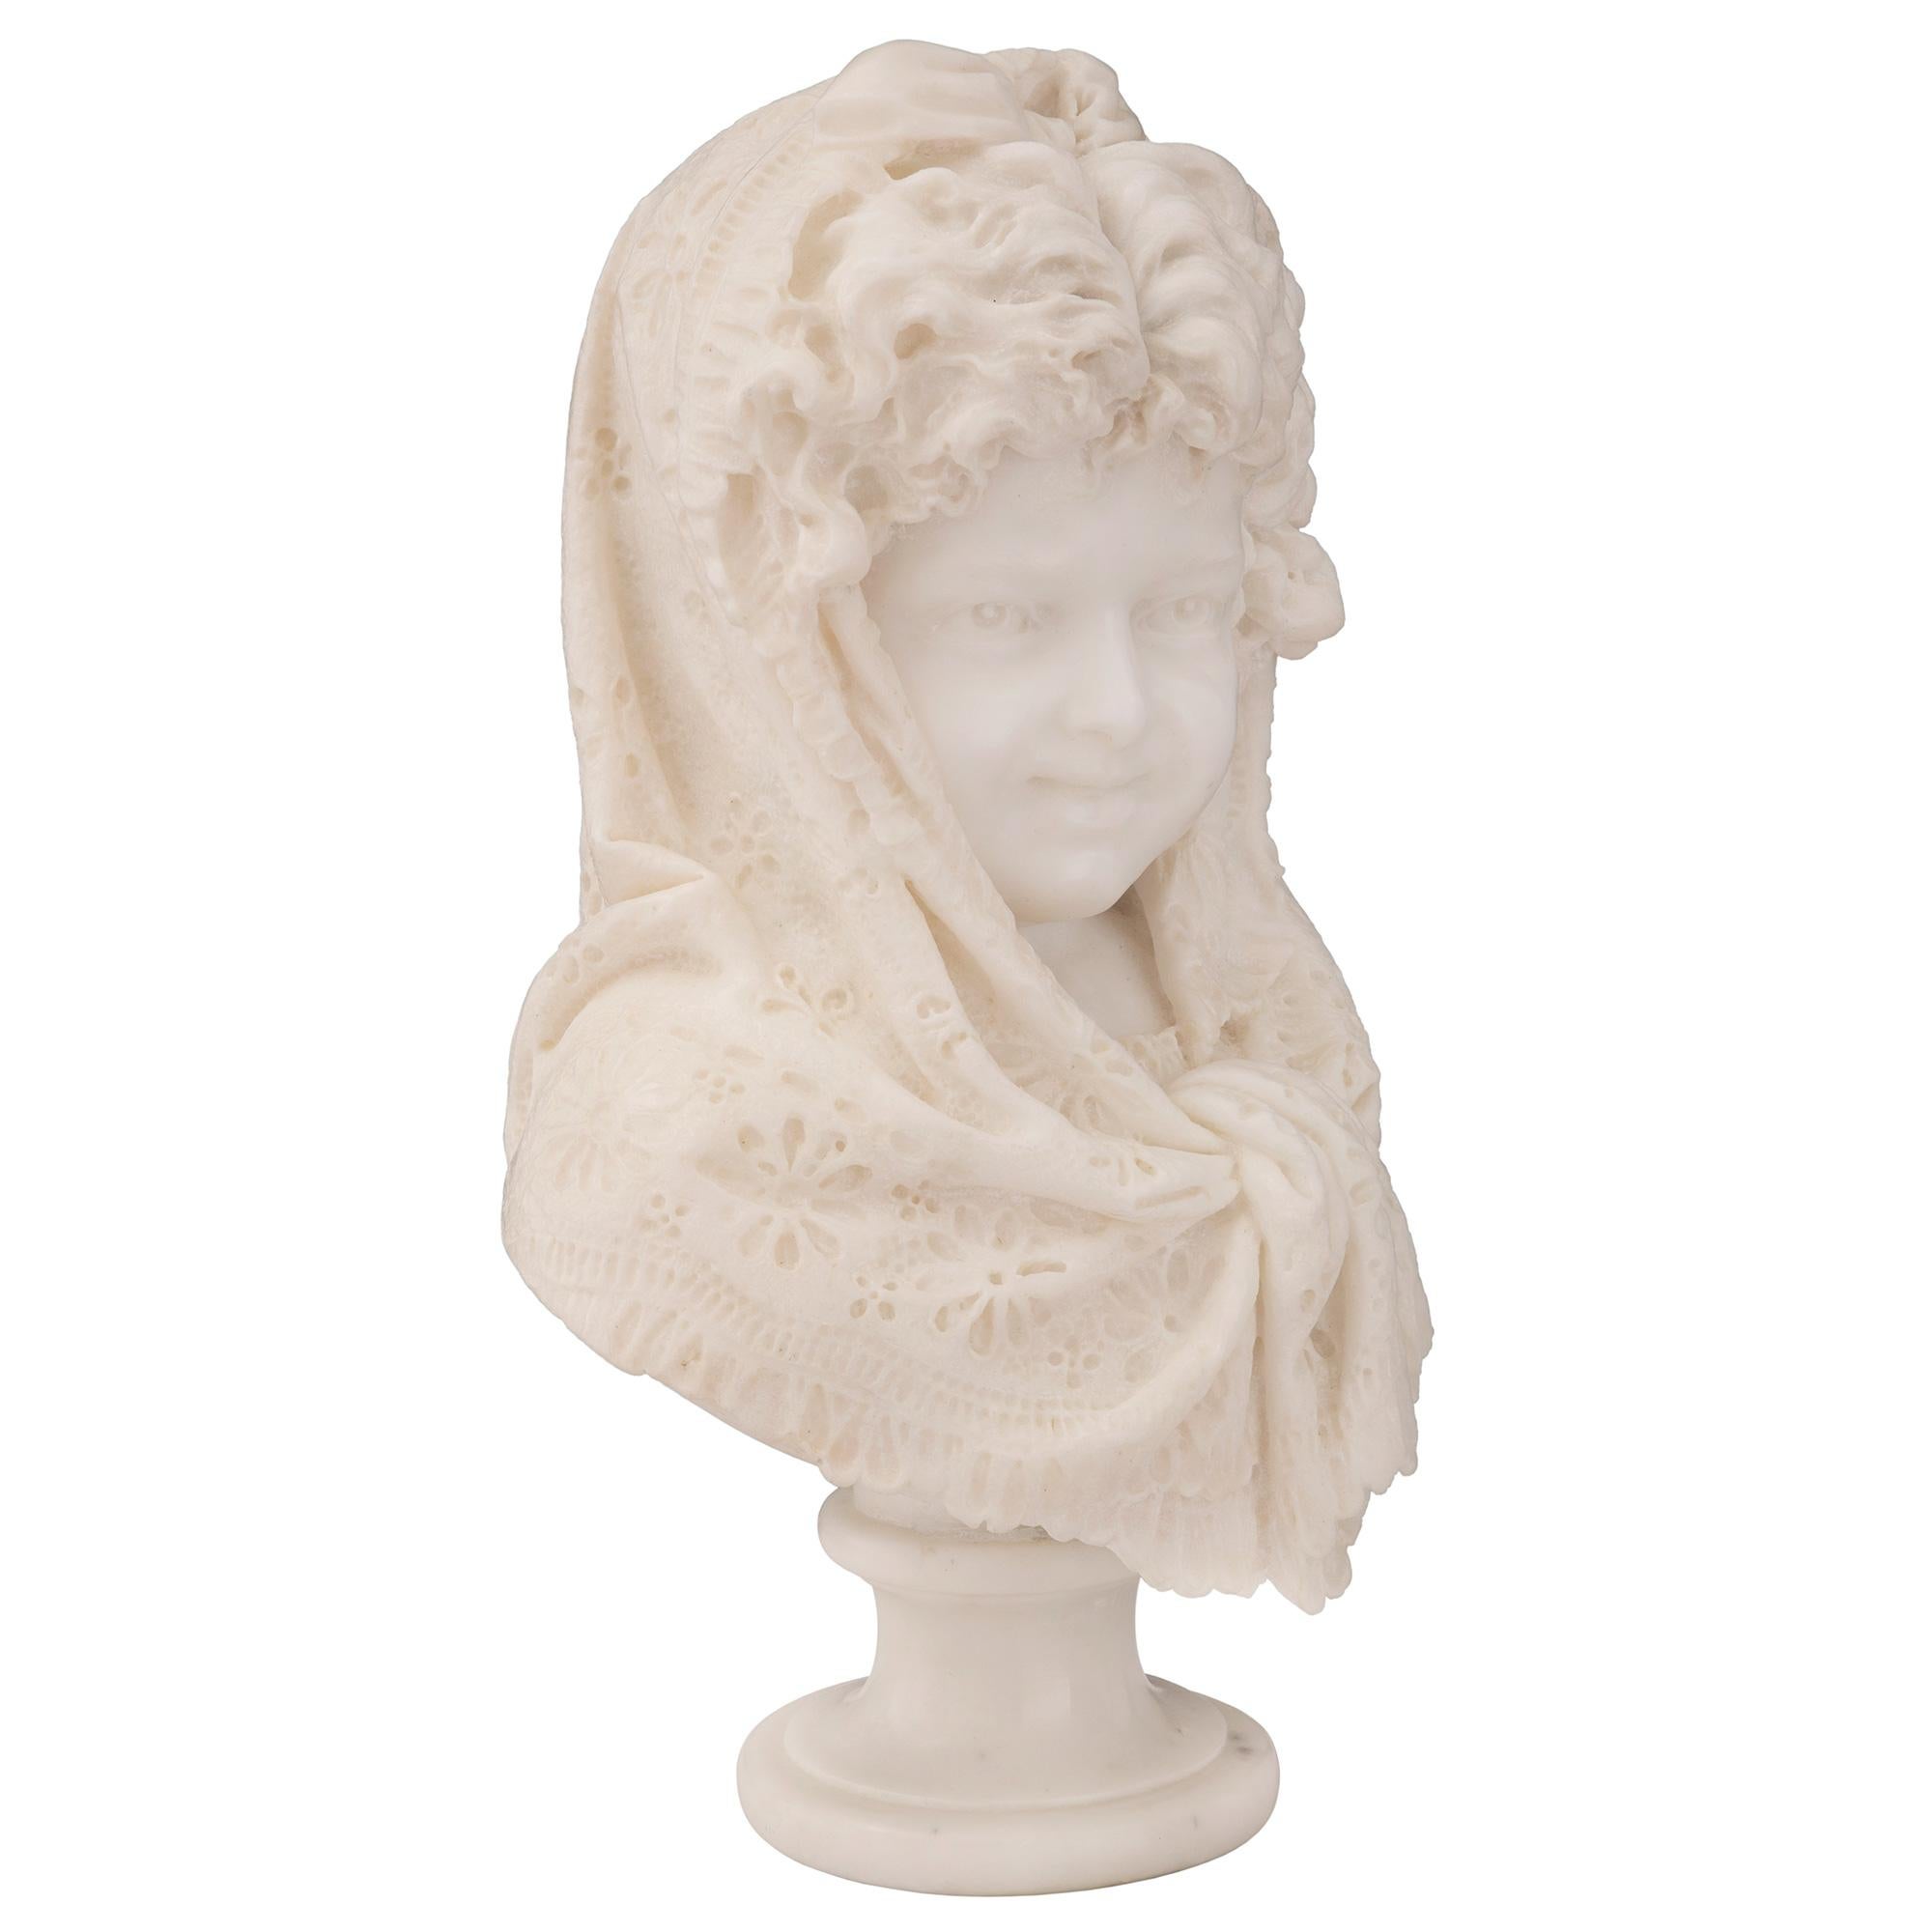 A stunning and finely detailed French 19th century white Carrara marble bust of a young girl, signed Zanatone Milano. The bust is raised by an elegant circular socle pedestal shaped base with a fine mottled border. Above is the beautiful and most